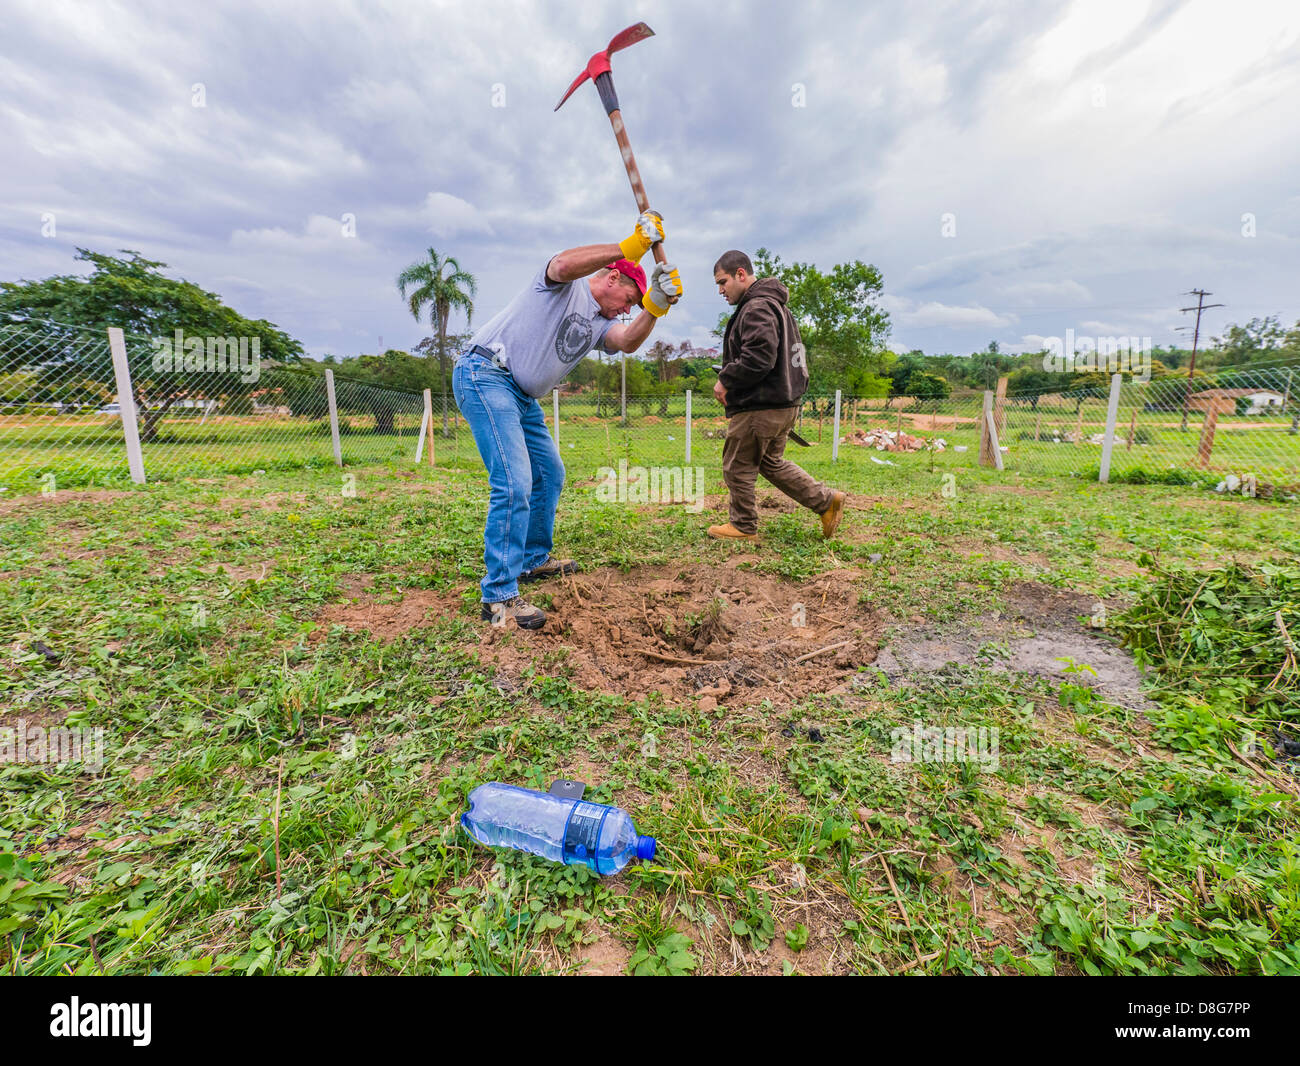 A Caucasian male adult volunteer for Habitat for Humanity Paraguay swings a pick axe high over his head while breaking ground. Stock Photo